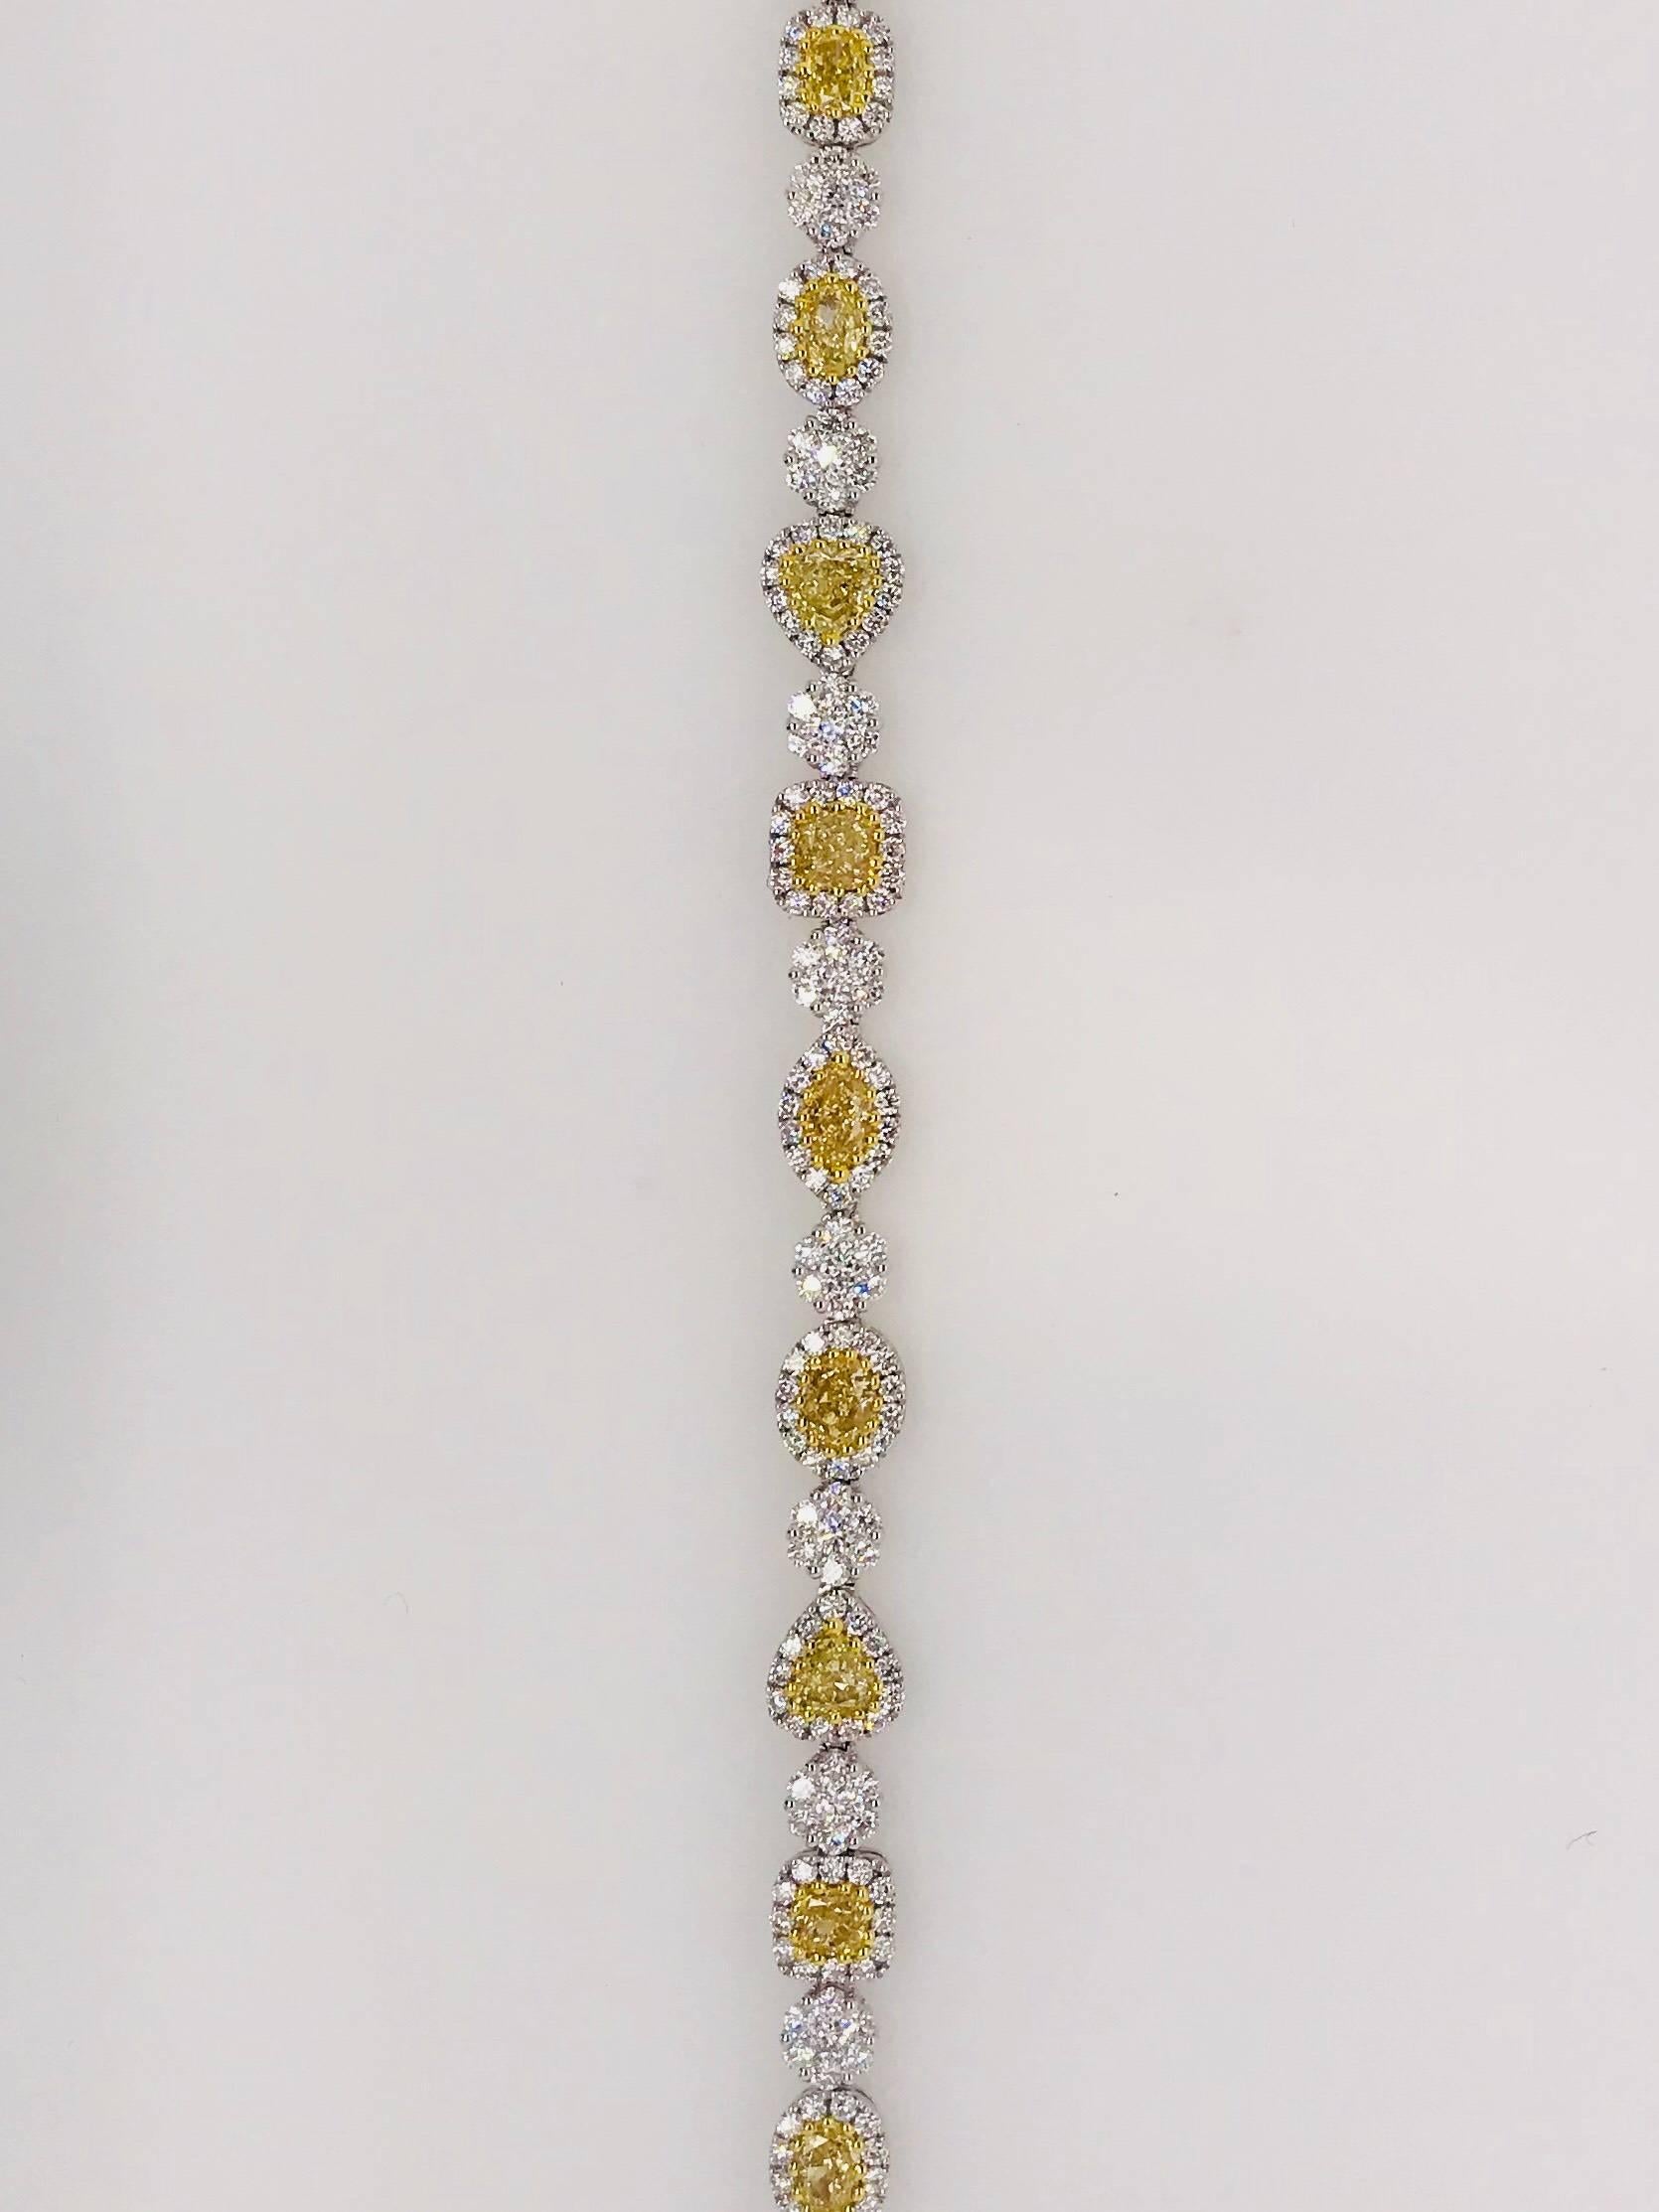 This stunning Matthew Ely bracelet is 18 ct White gold and set with 14 = 4.09CT fancy yellow colour diamonds + 276 = 3.59CT round brilliant cut diamonds. Each featured diamond is encased in a diamond halo.
